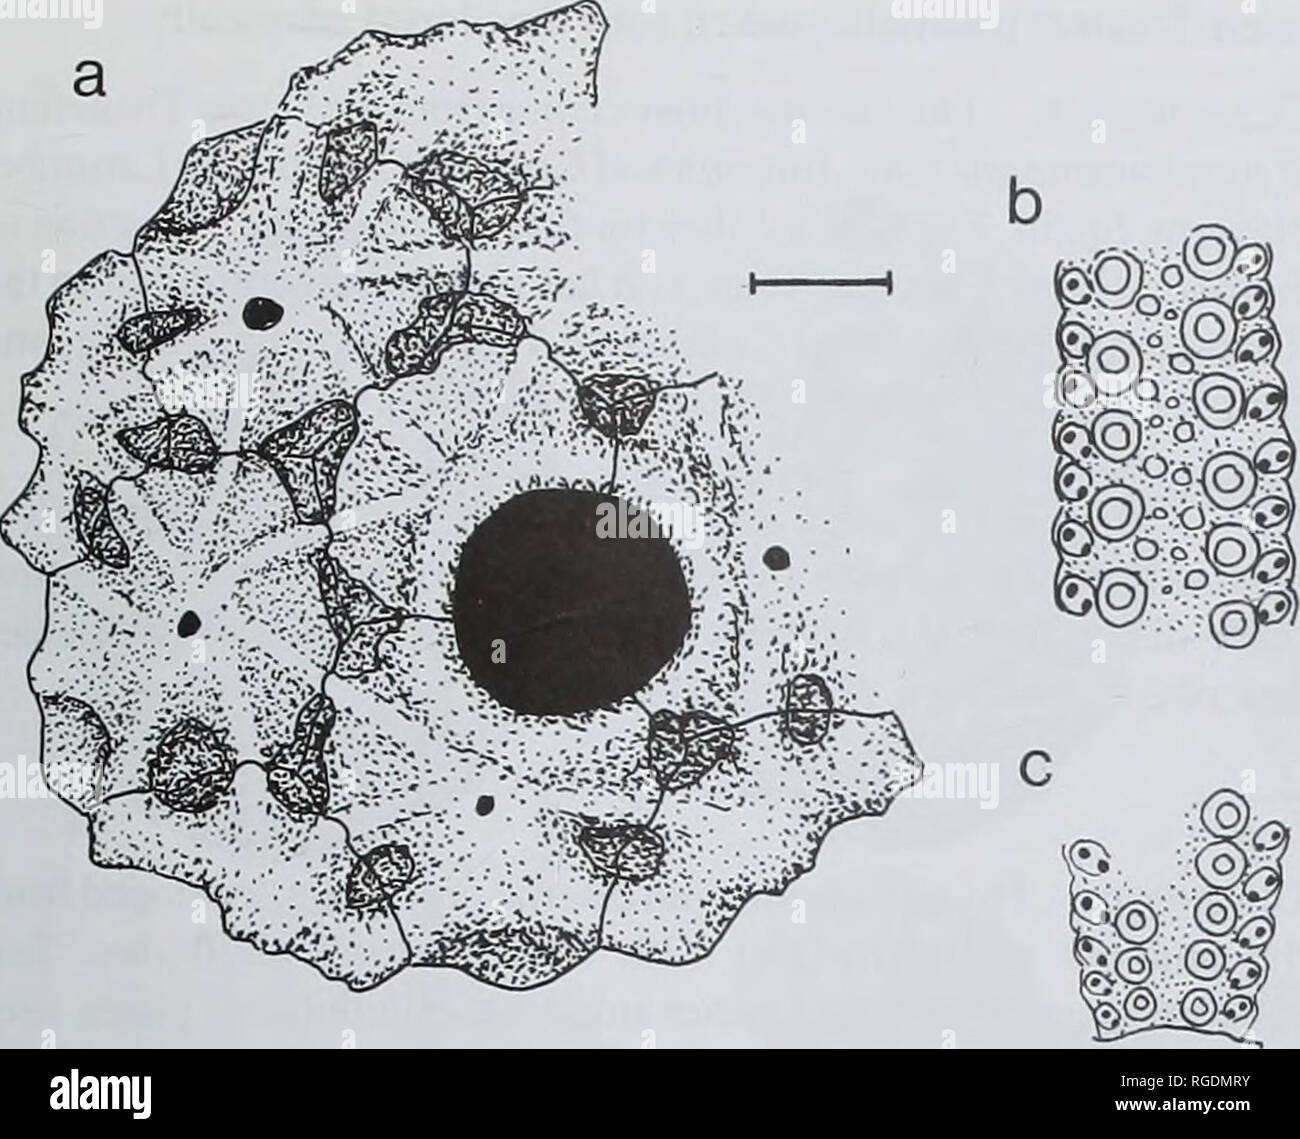 . Bulletin of the Natural Histort Museum. Geology series. LATE CRETACEOUS-EARLY TERTIARY ECHINOIDS 93. Fig. 6 Camera lucida drawings of plating in Salenia (Pleurosalenia) scabra (Nestler, 1965) from the coast west of Cabo Mayor (Santander, Cantabria); BMNH EE6I10. a. apical disc; b, adapical ambulacrum; c, adoral ambulacrum, peristome at base. Scale bar = 1 mm. 1866b) has usually been treated as a distinct species ciiaracterized by having %harp caiina on apical disc plates (e.g. Geys, 1979). However, Cotteau's original illustrations do not show sharp carina, only a somewhat gentle undulose pla Stock Photo